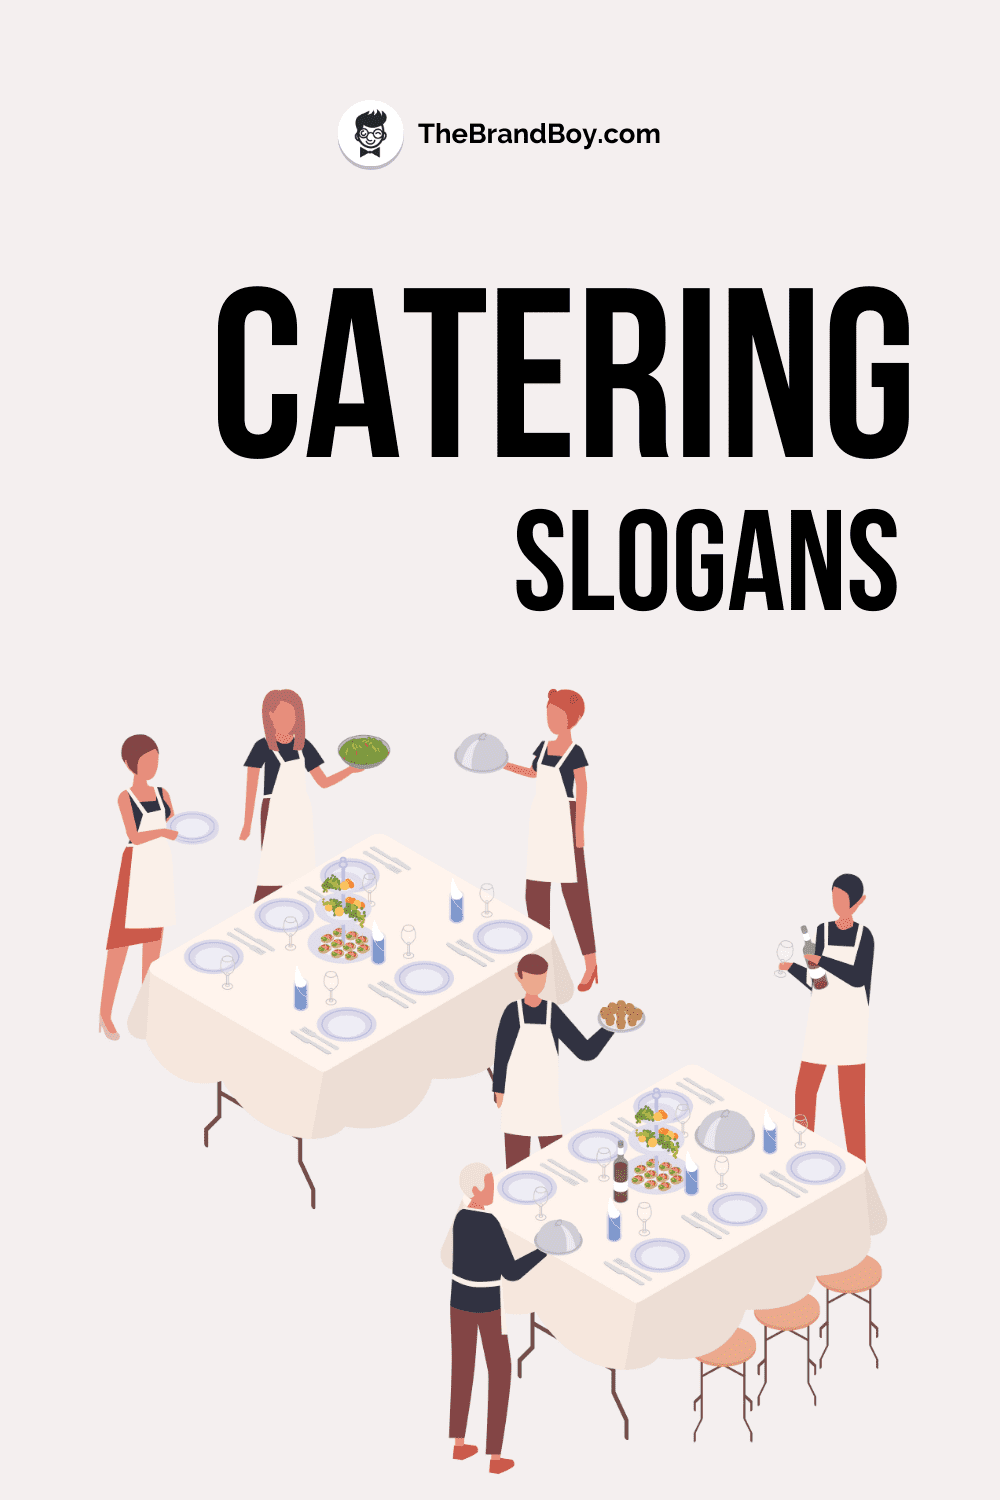 402 Catering Slogans And Taglines Generator Guide